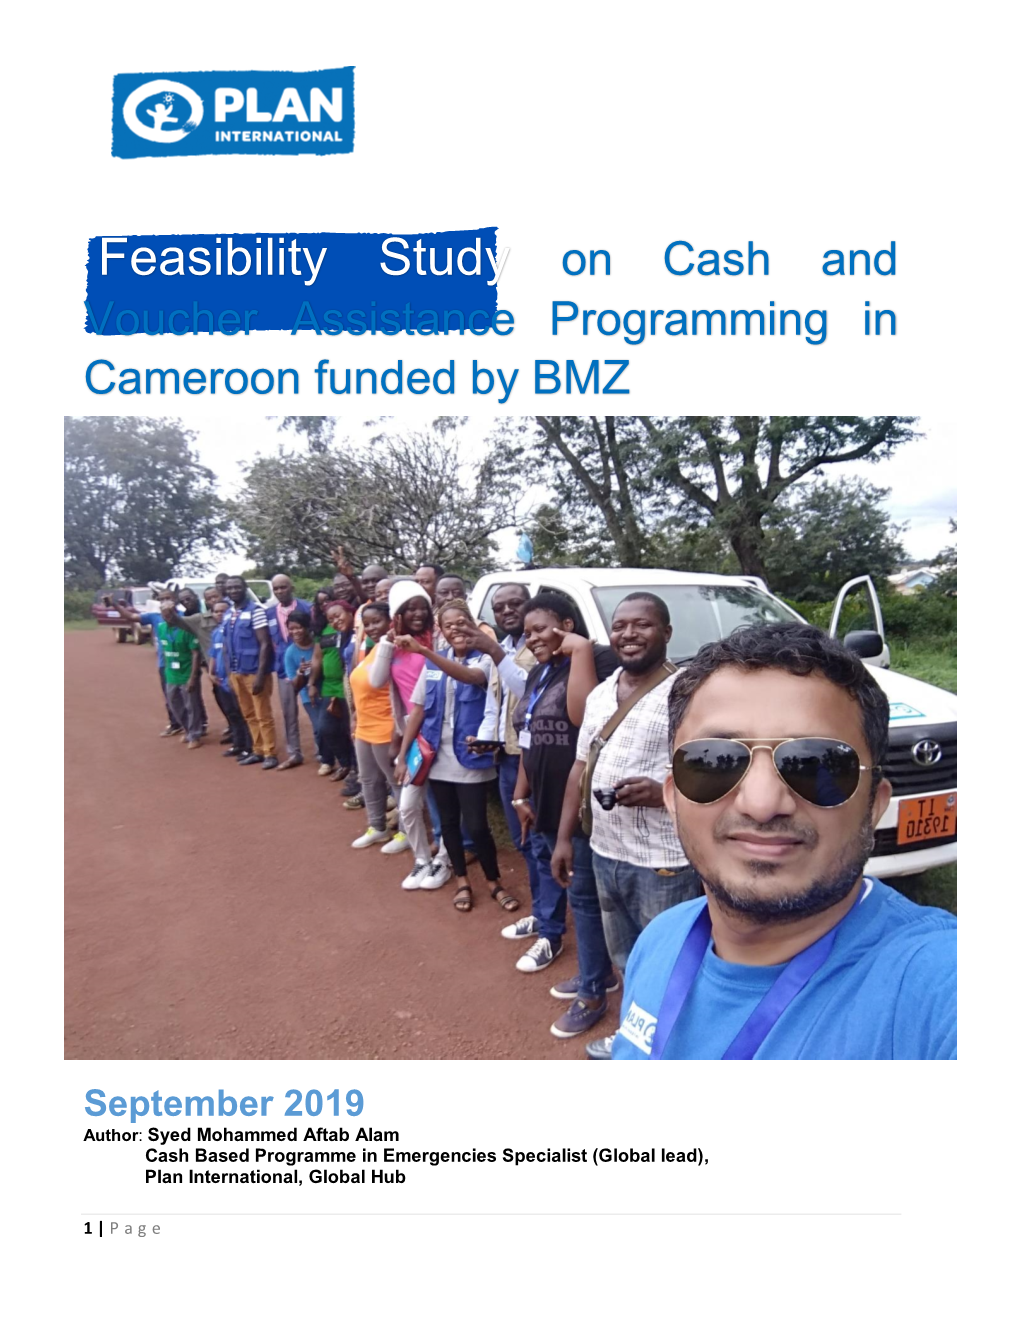 Feasibility Study on Cash and Voucher Assistance Programming in Cameroon Funded by BMZ